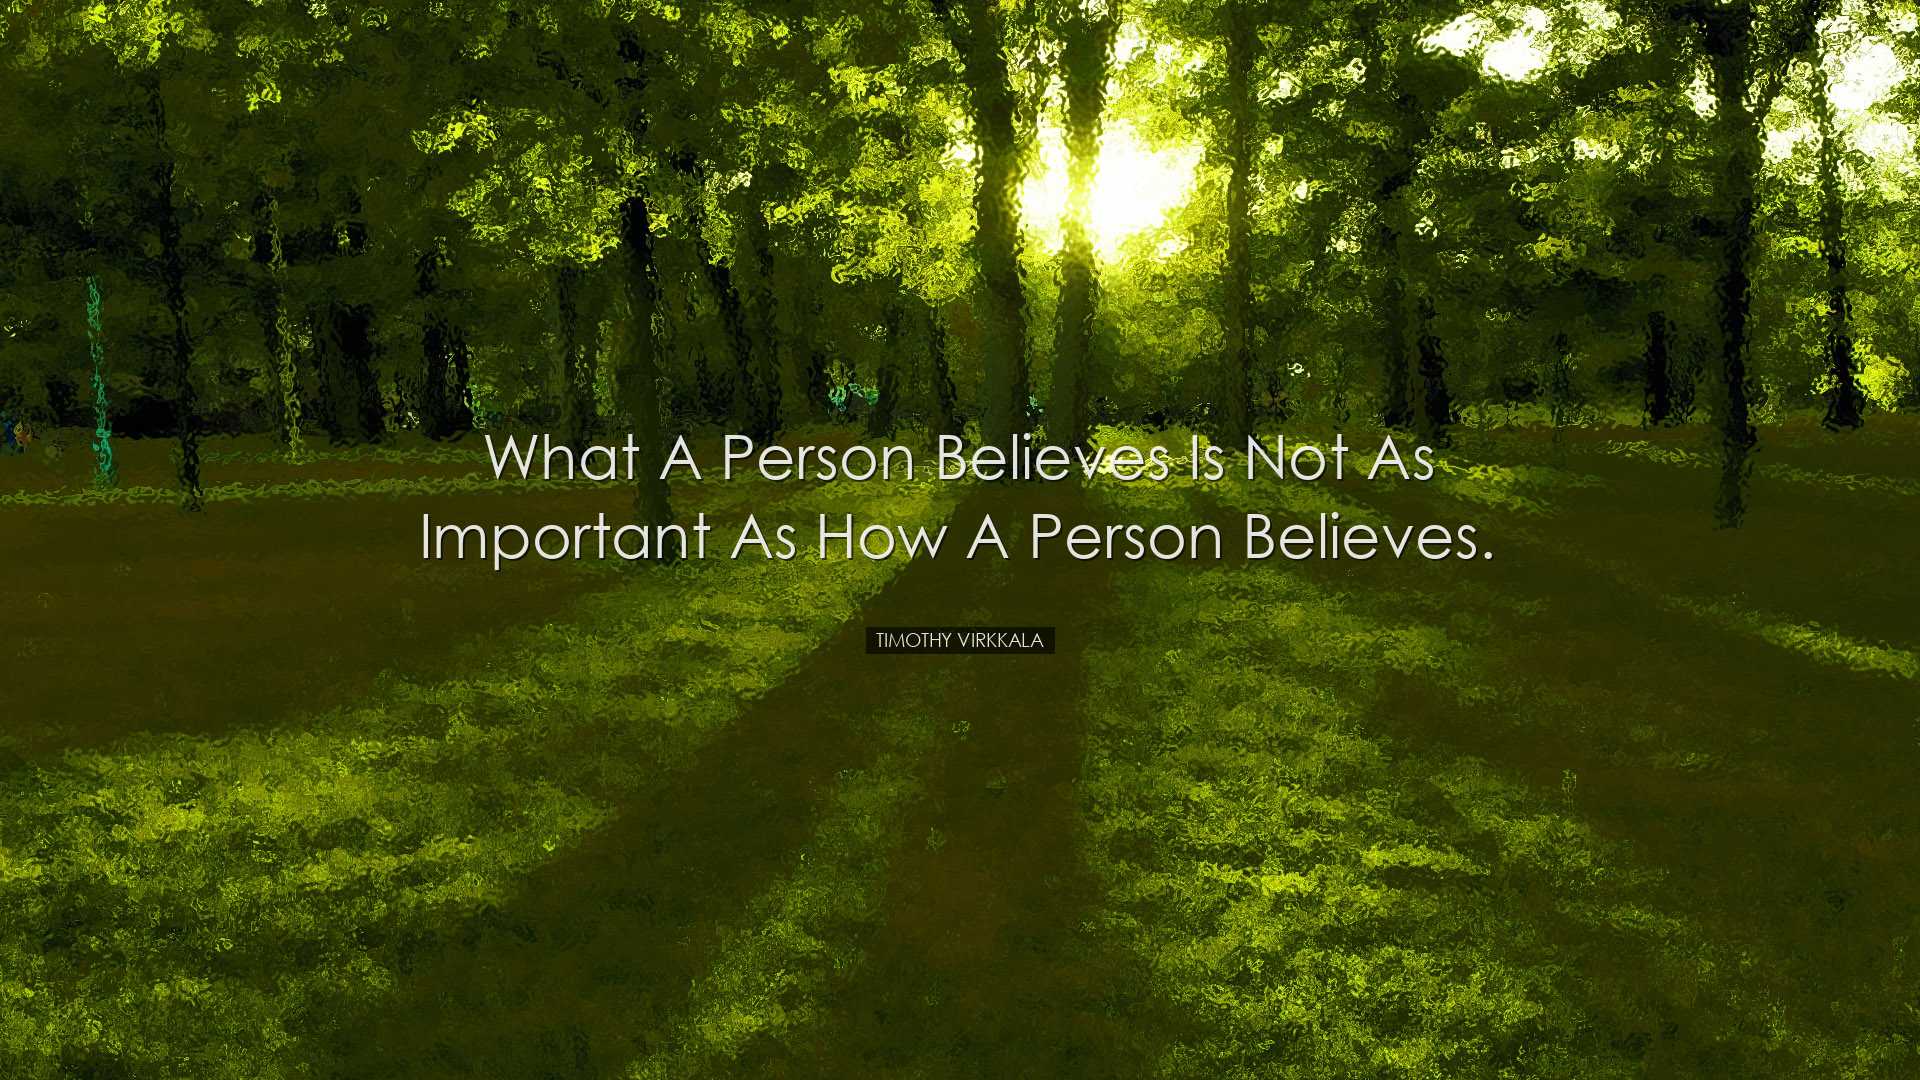 What a person believes is not as important as how a person believe